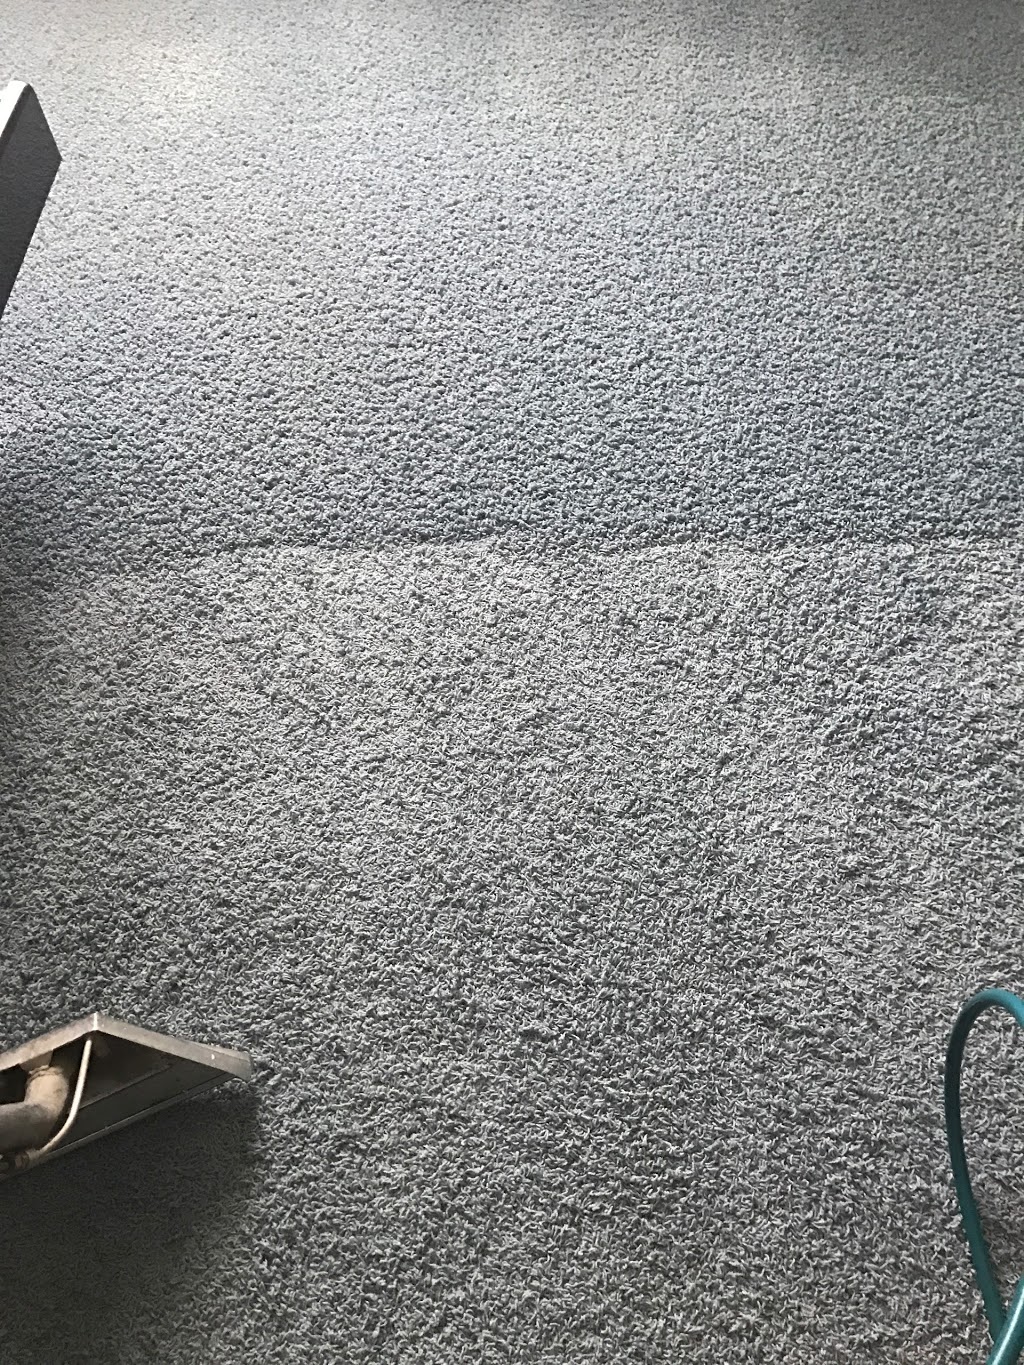 Spots Gone Carpet Cleaning & Restoration | 15360 Krypton St NW, Ramsey, MN 55303, USA | Phone: (763) 760-2995